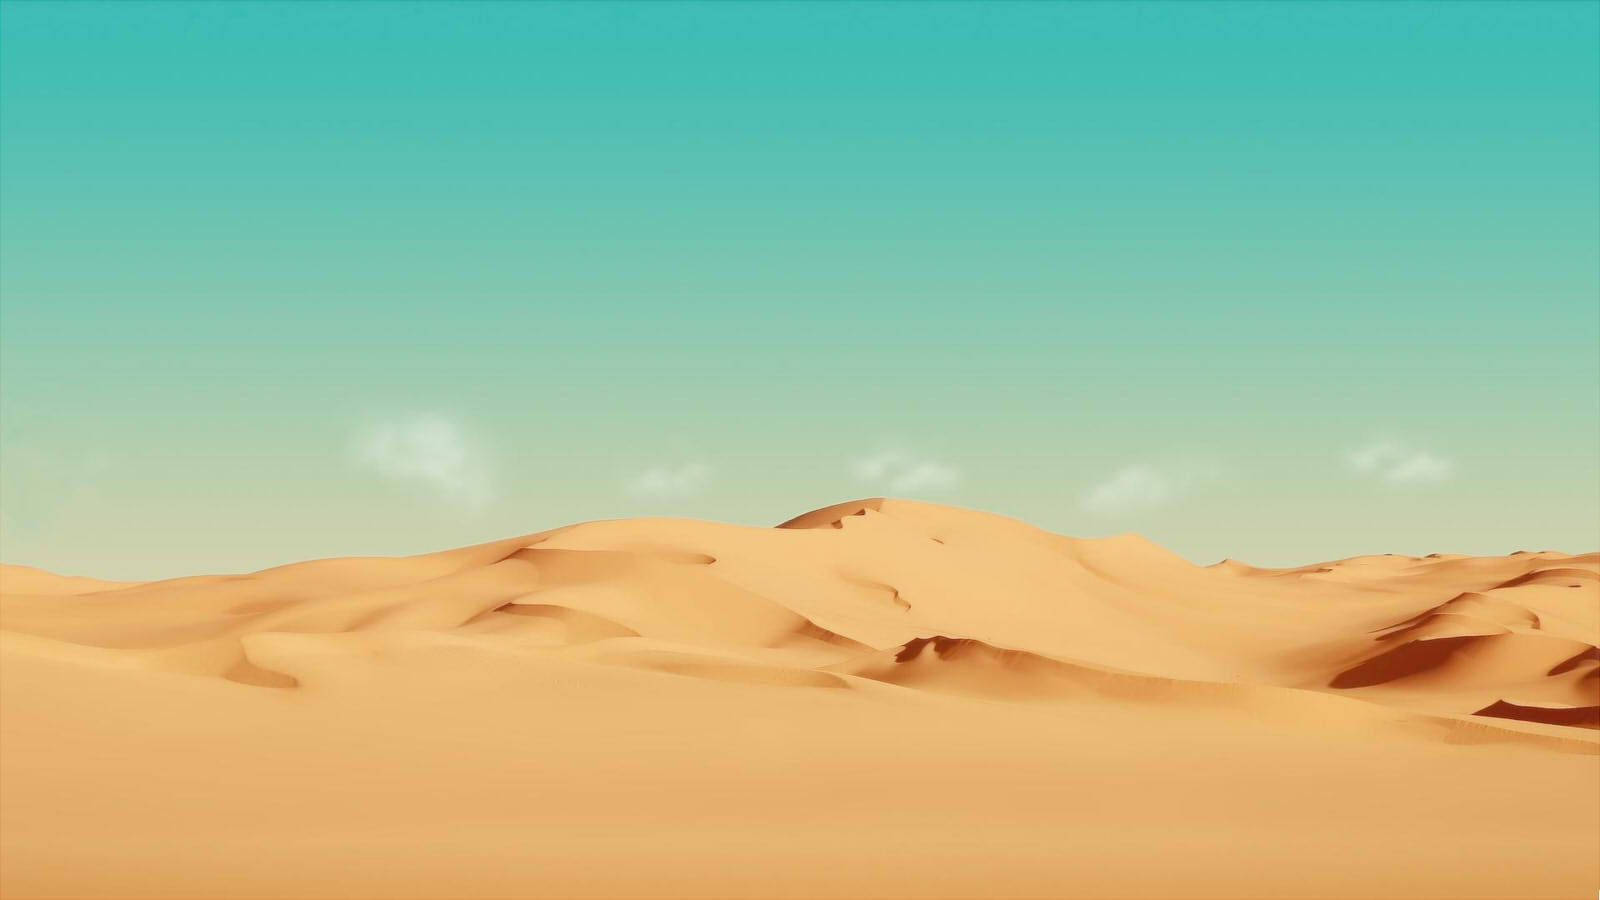 Feel the sand beneath your toes in this desert oasis Wallpaper